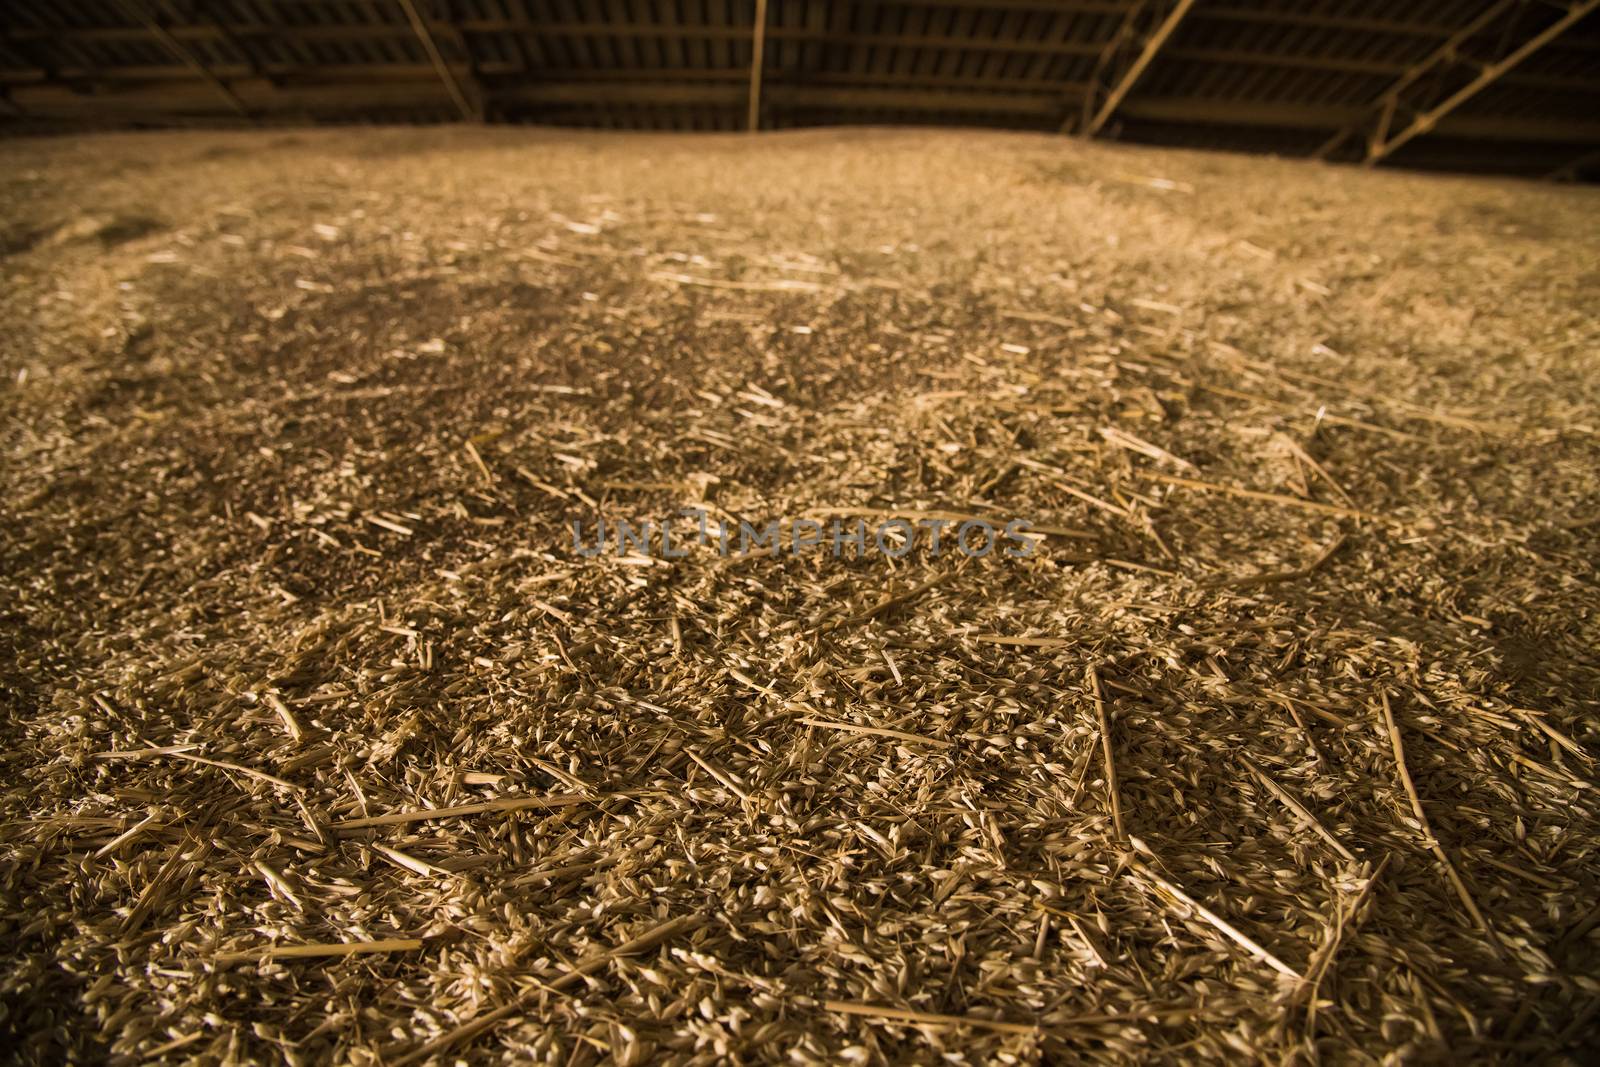 Pile of heaps of wheat grains at mill storage or grain elevator.